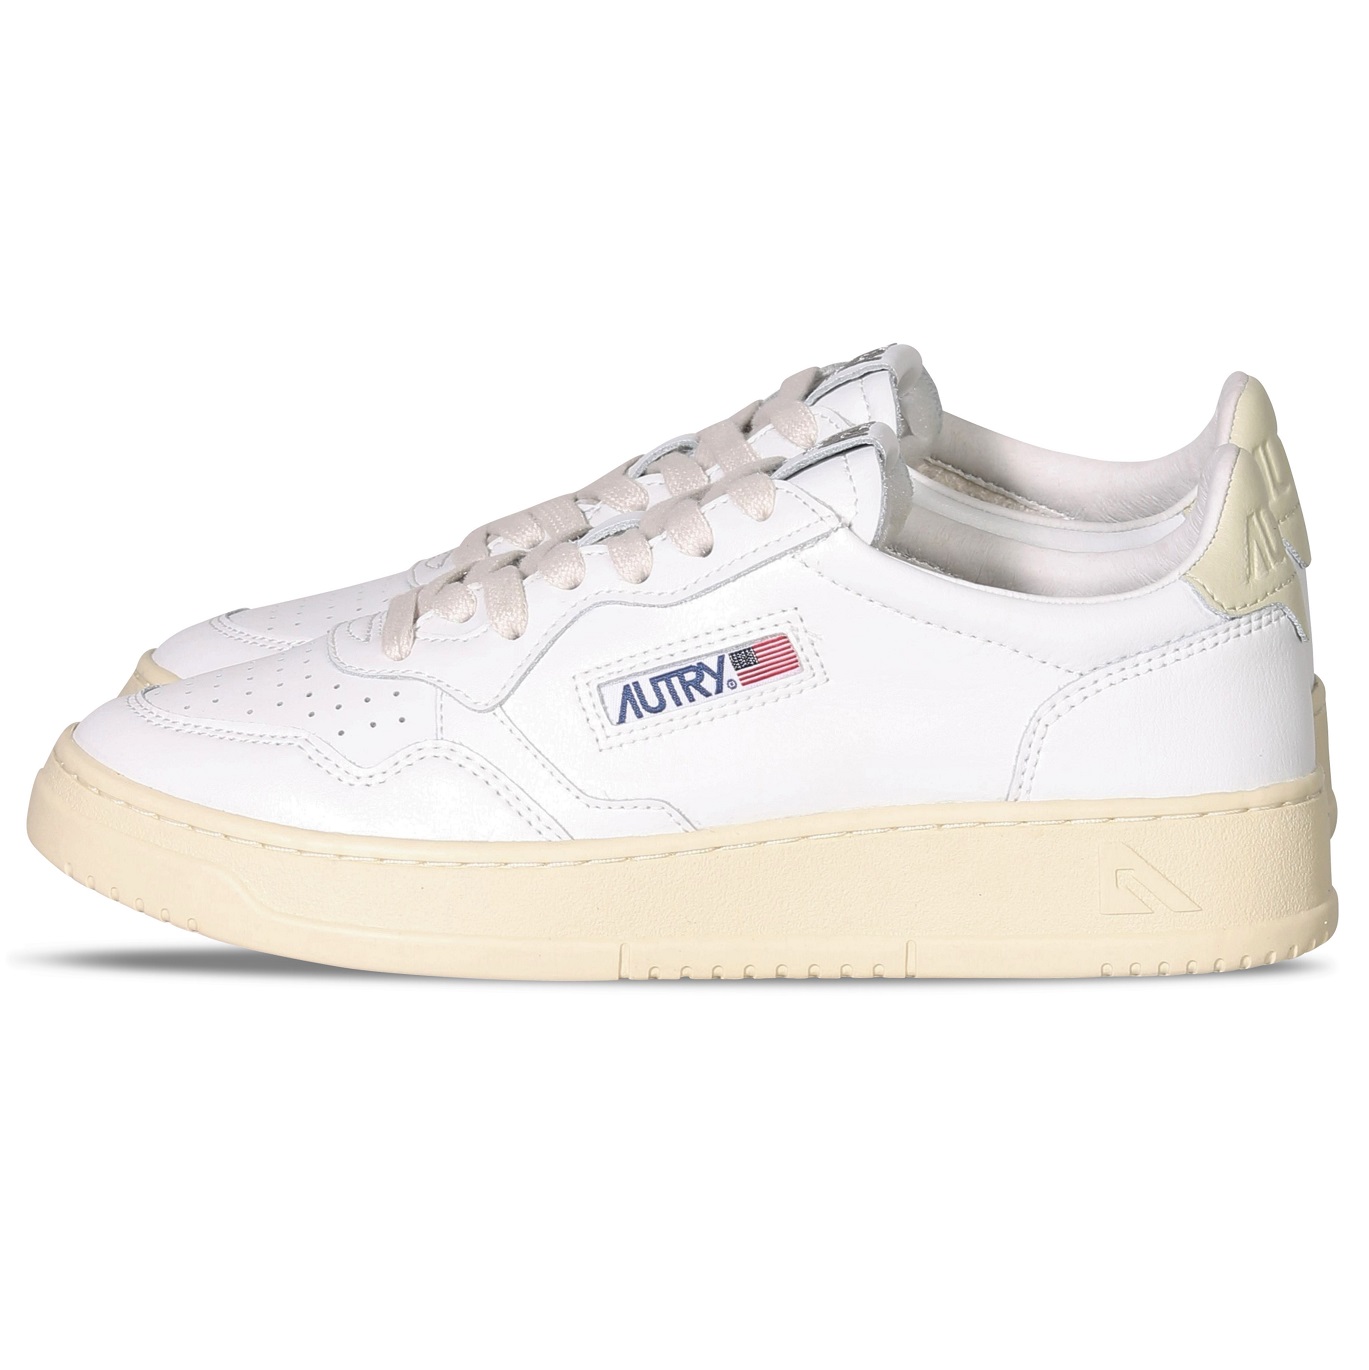 AUTRY ACTION SHOES Sneaker Low in White/Beige 35